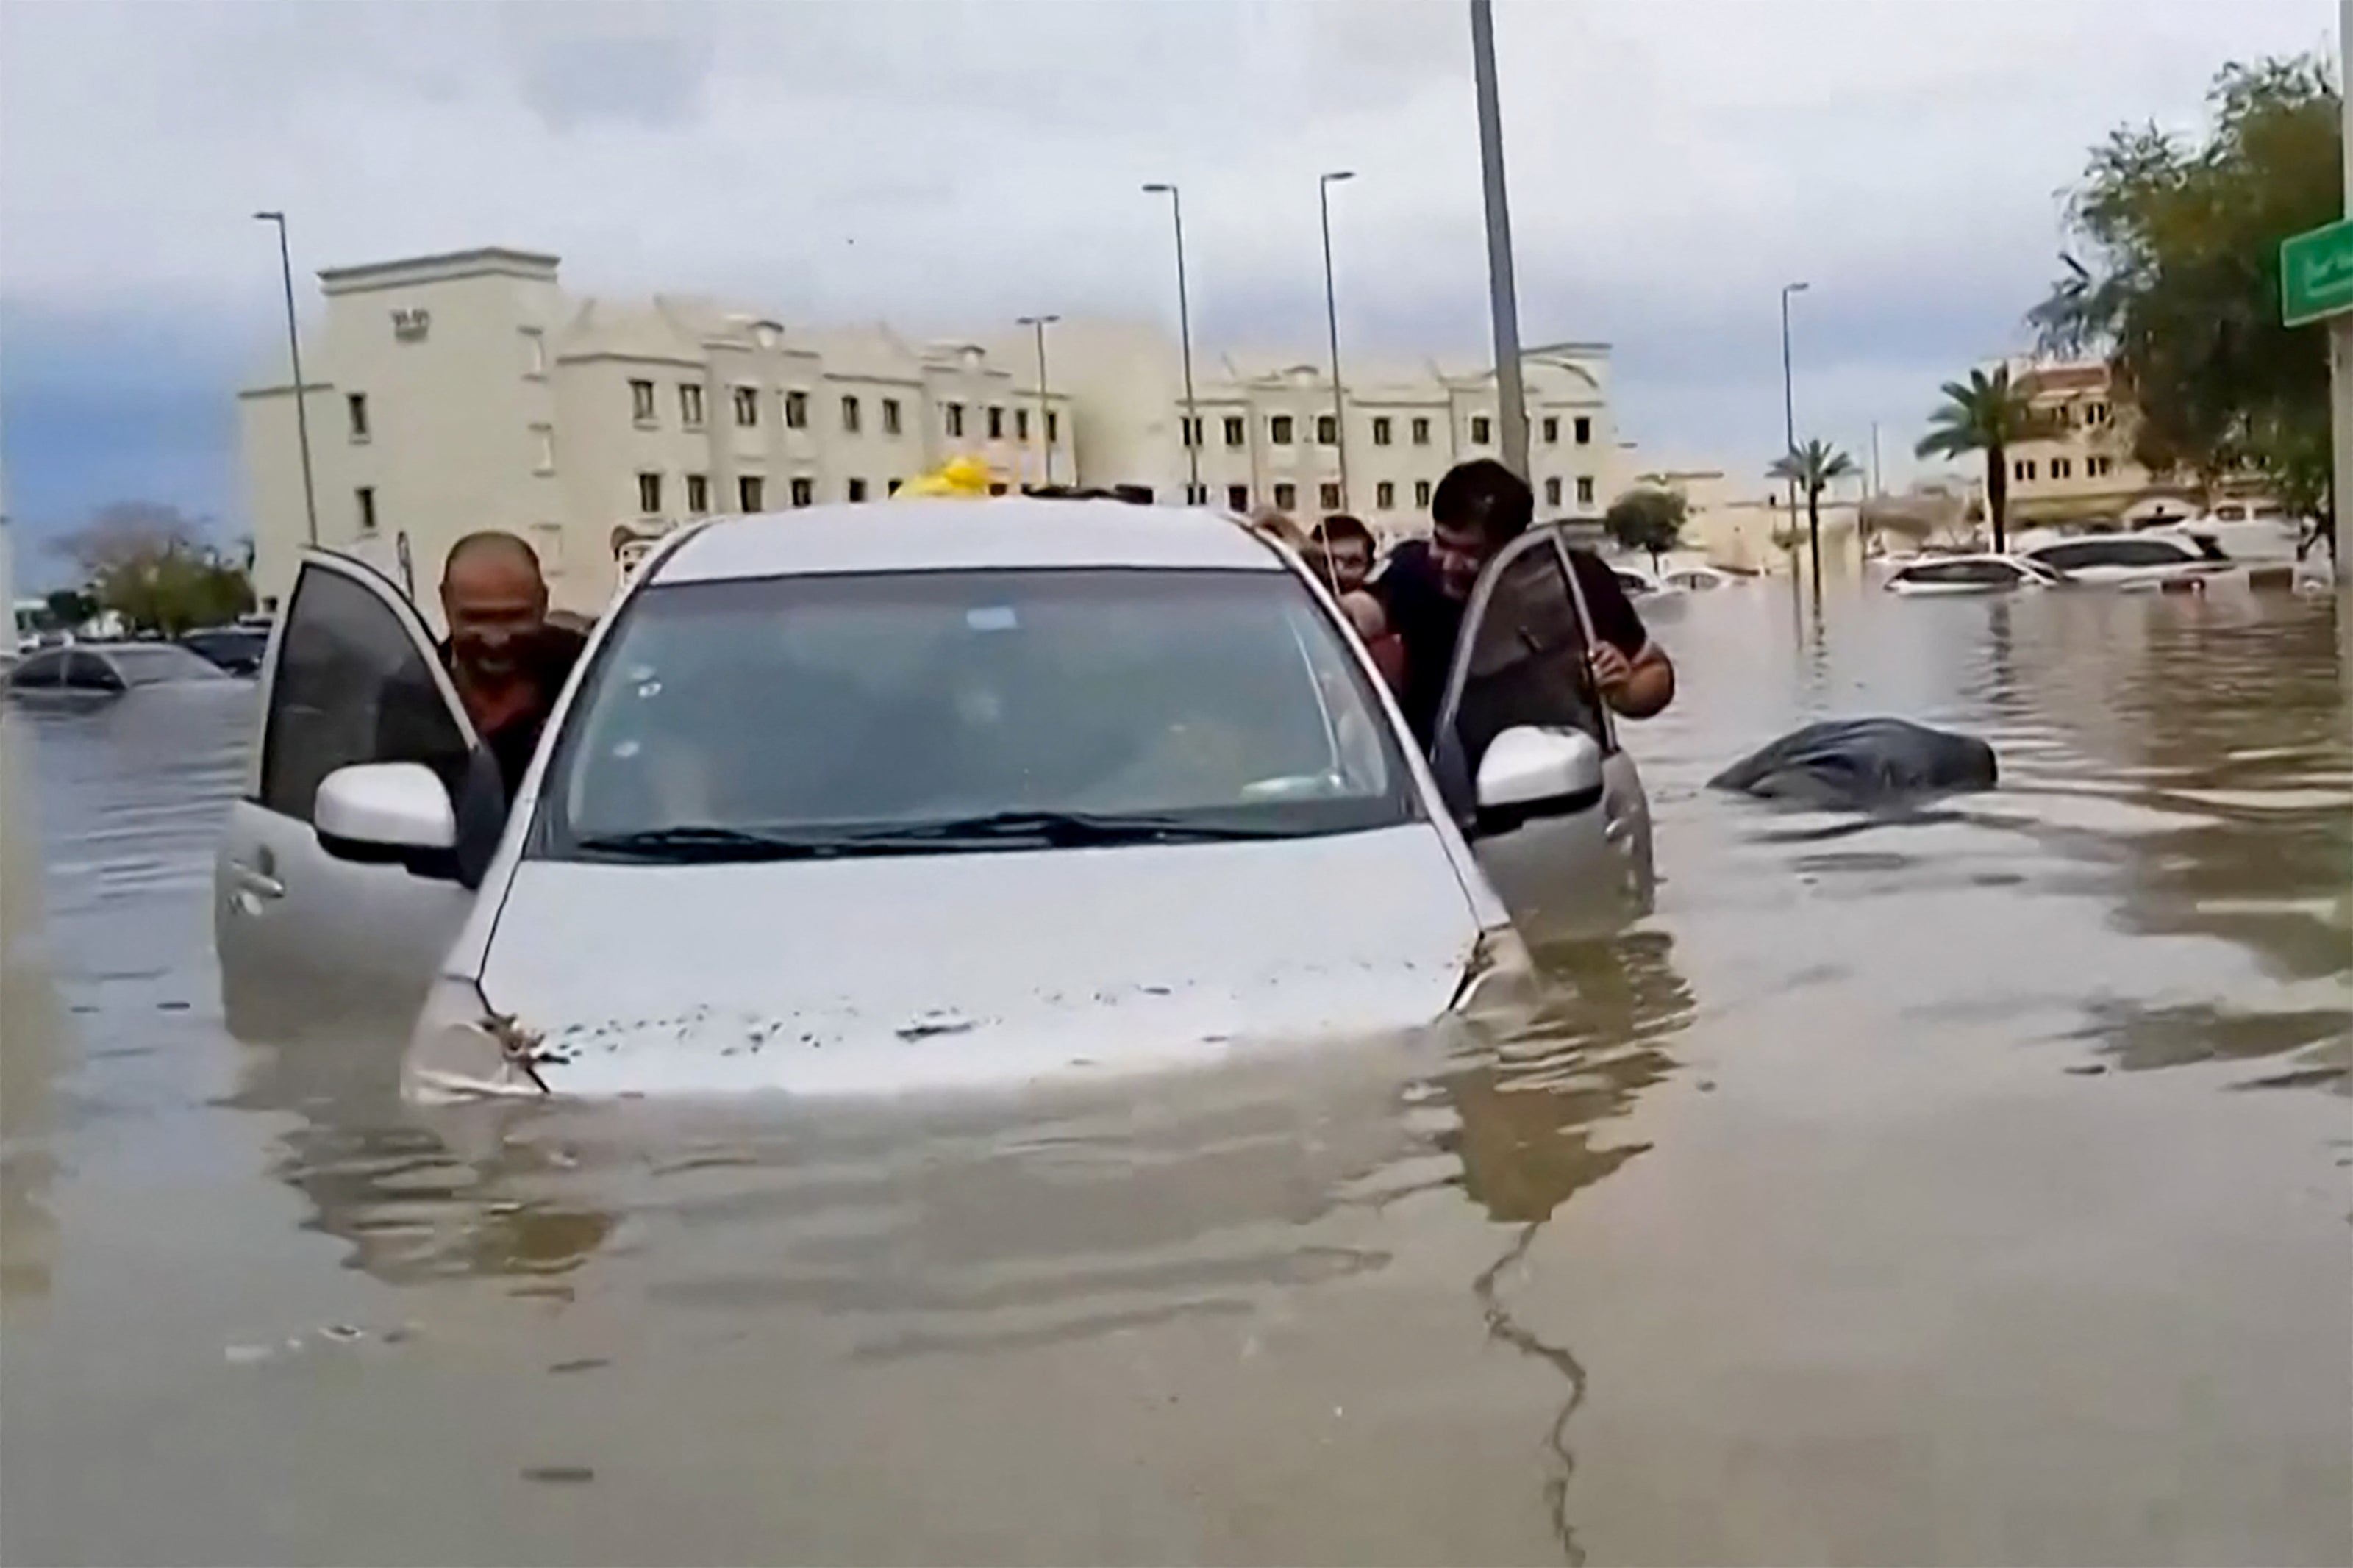 in pictures: dubai reels from floods after storm brings year and a half’s worth of rain in one day